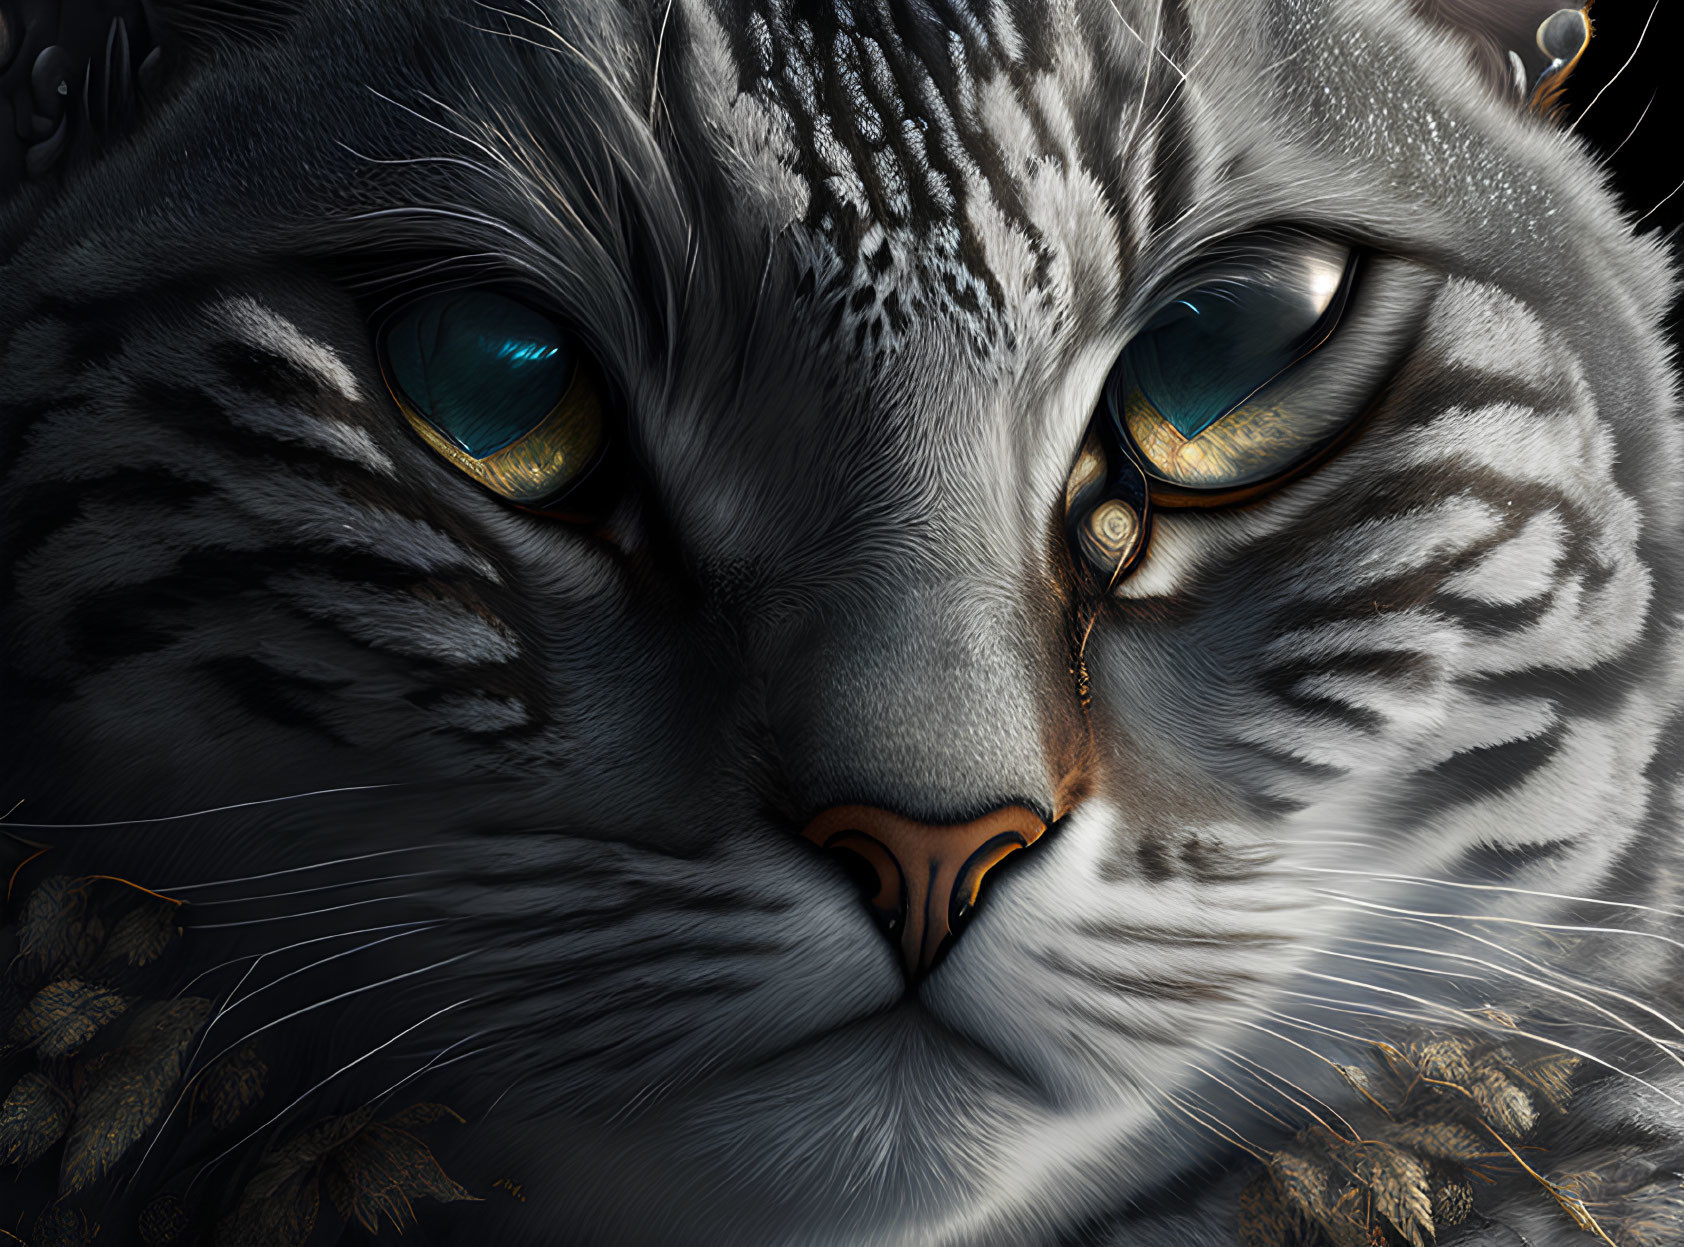 Detailed Digital Illustration of Cat with Amber Eyes & Grey Striped Fur